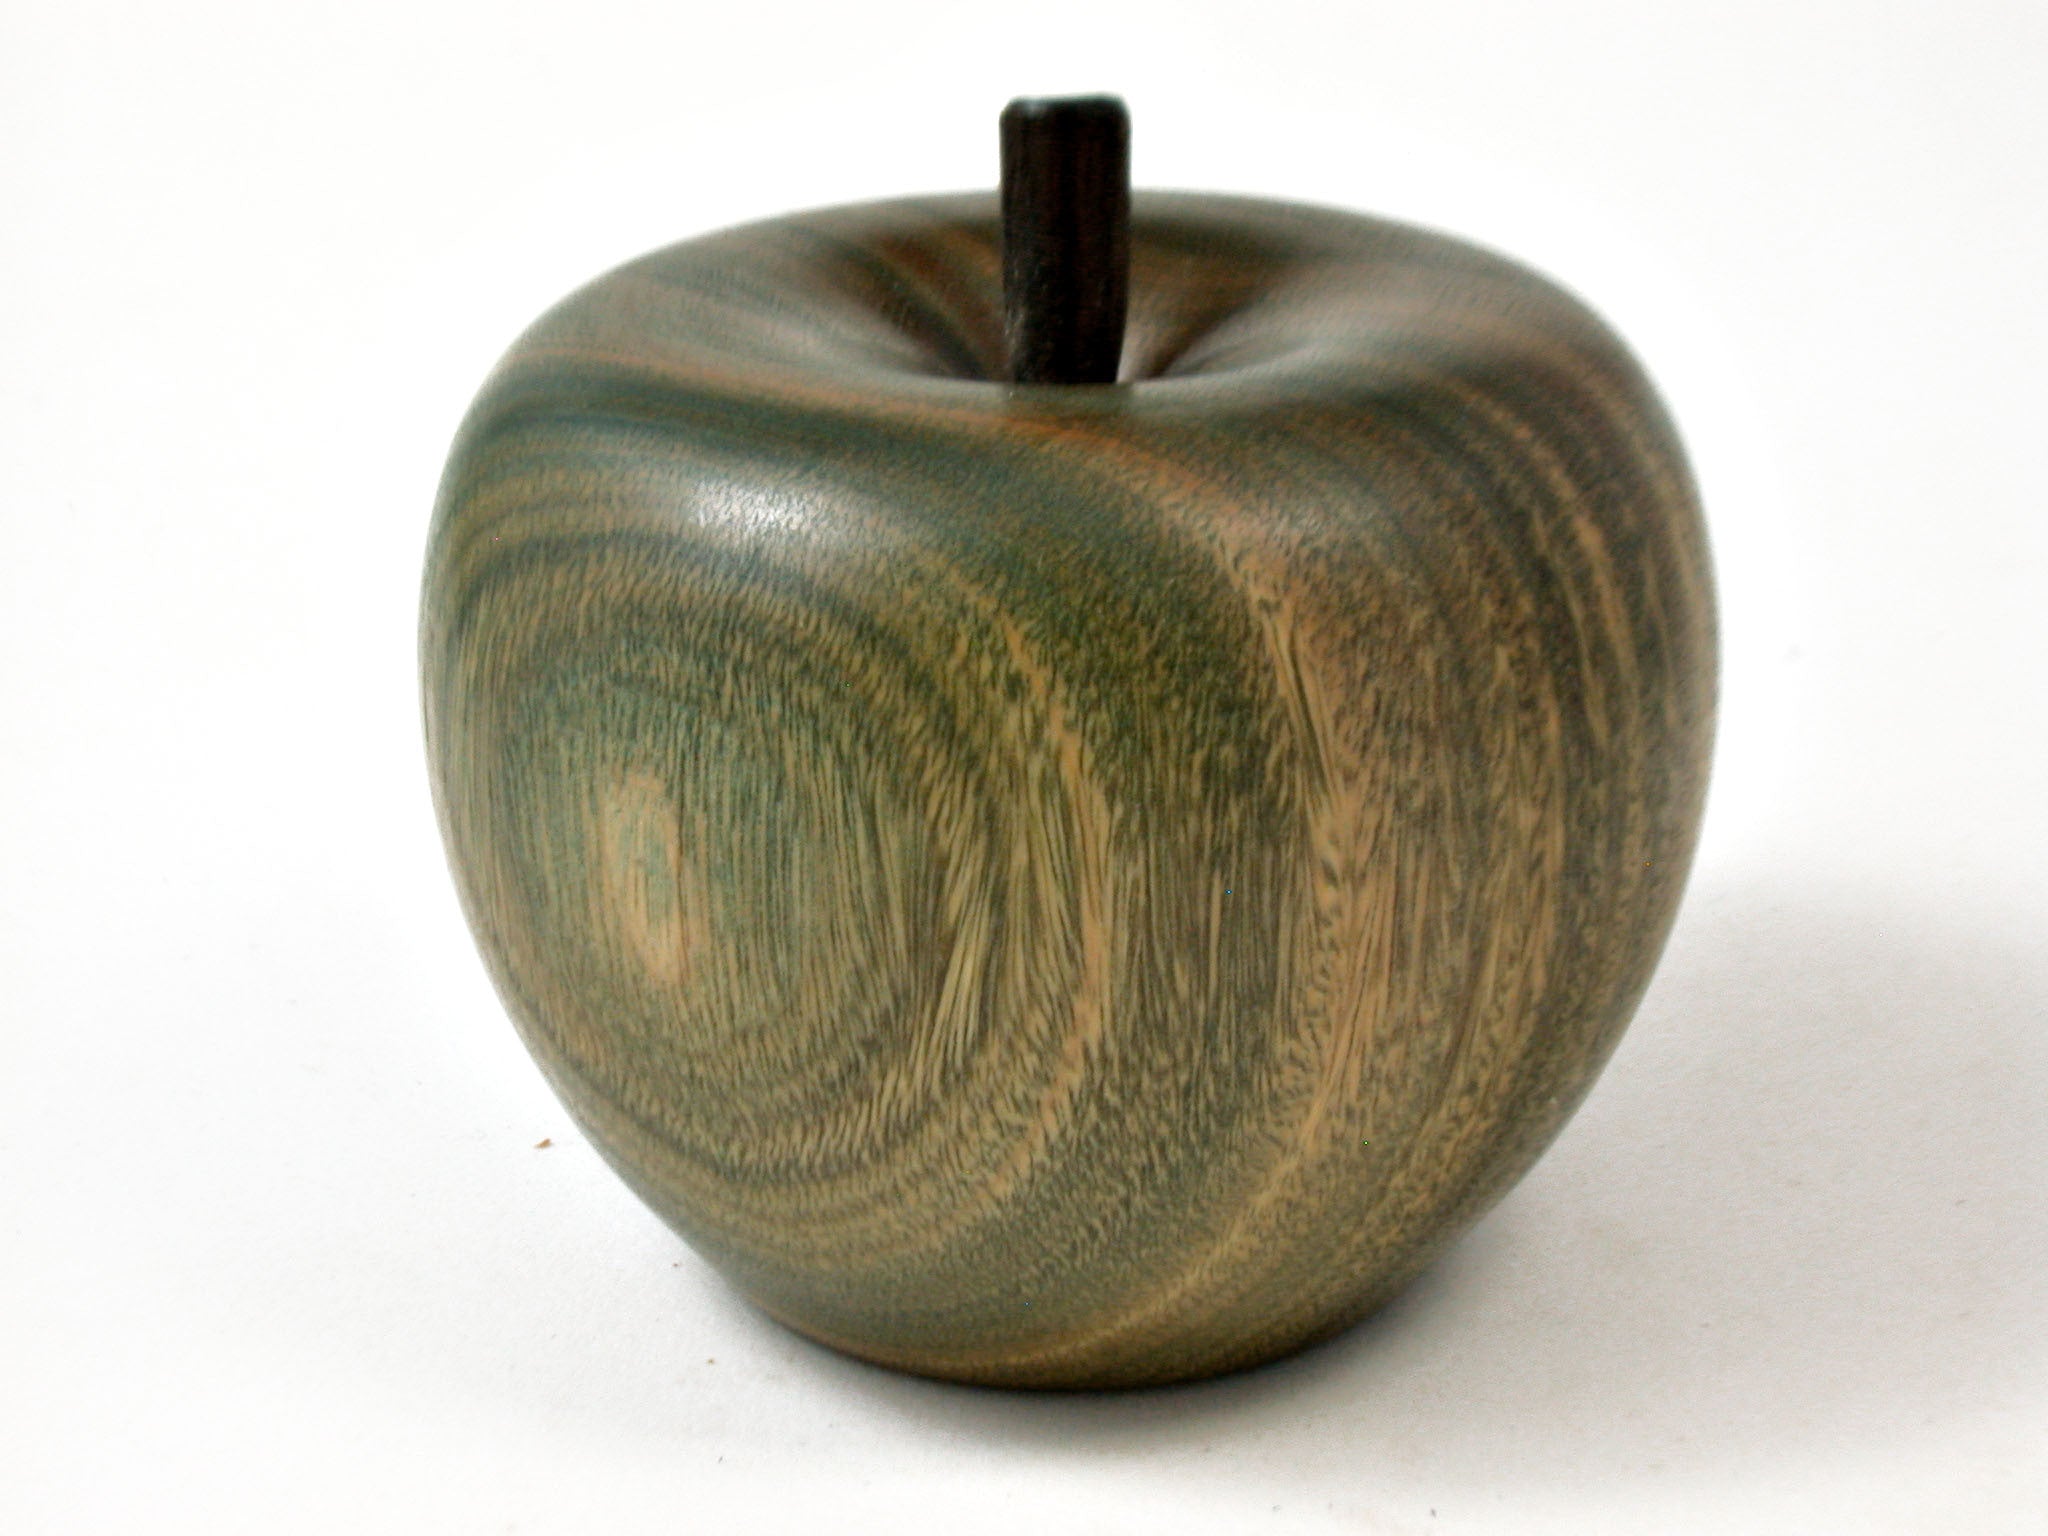 LV-2893  Hand Turned Apple Salt & Pepper Shaker, Secret Compartment from Verawood and Ebony